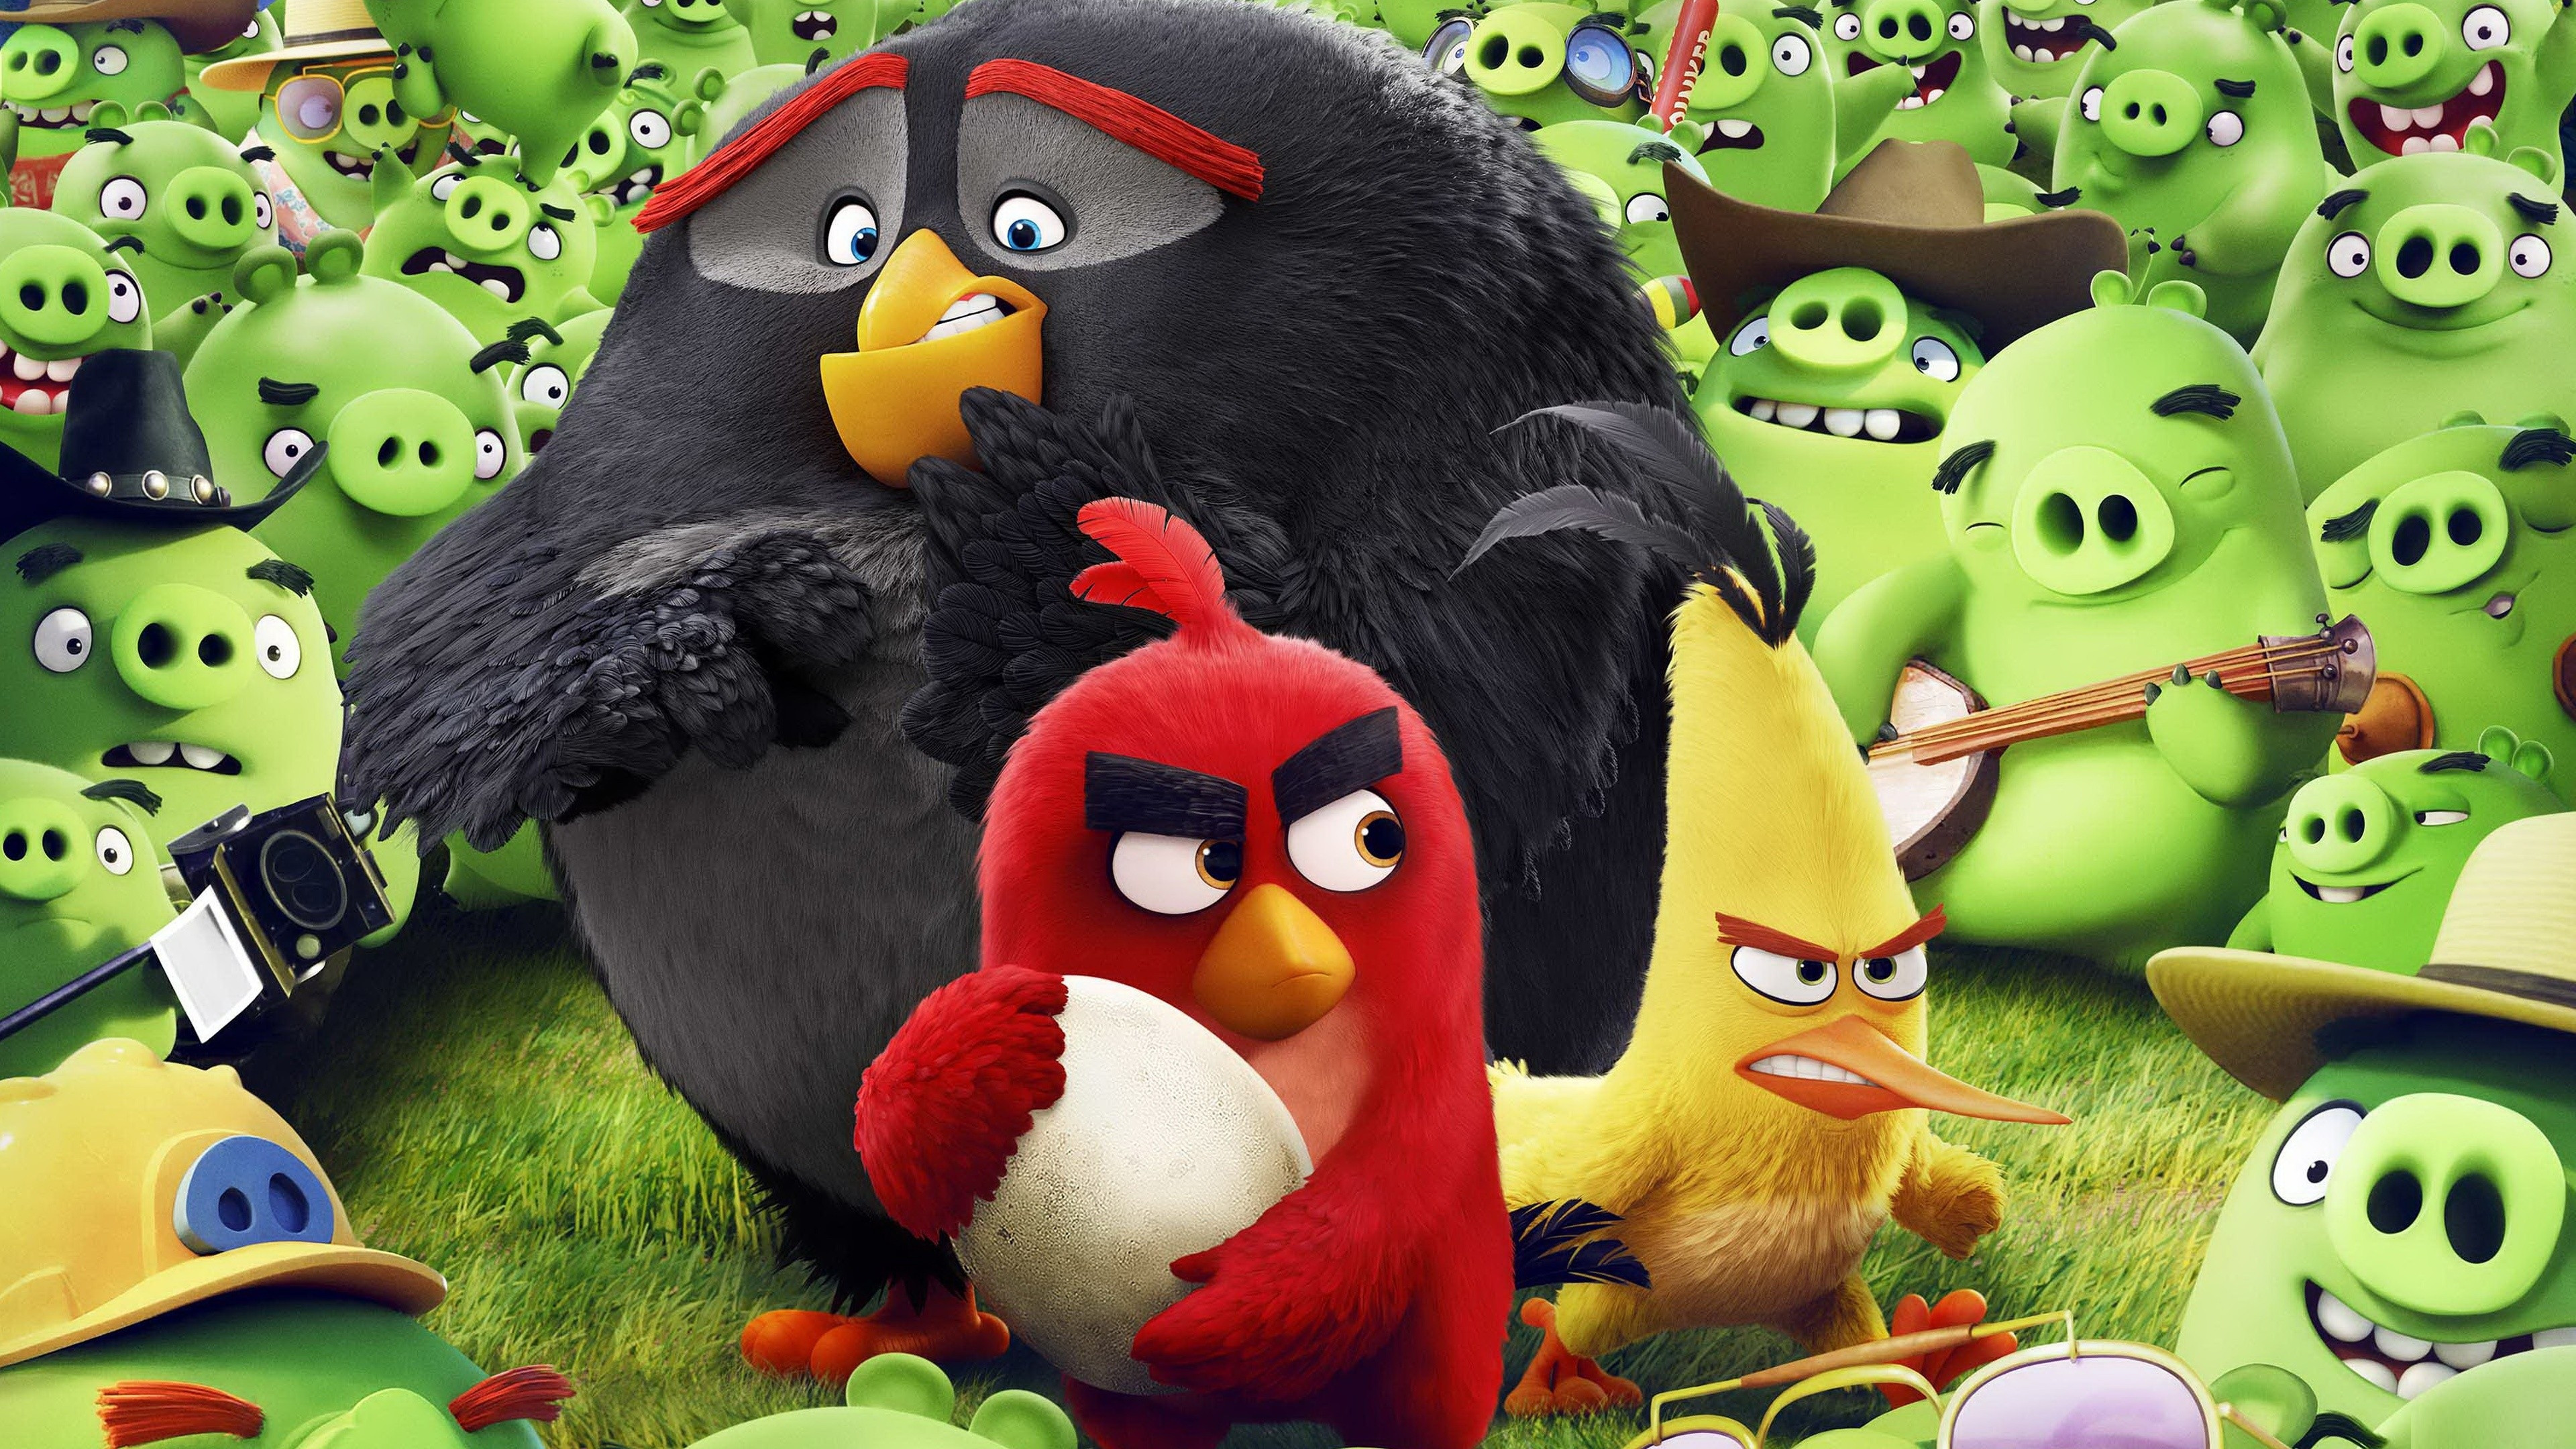 http://wallpapershome.com/images/wallpapers/angry-birds-movie-3840x2160-chuck-red-bomb-best-animation-movies-of-10731.jpg